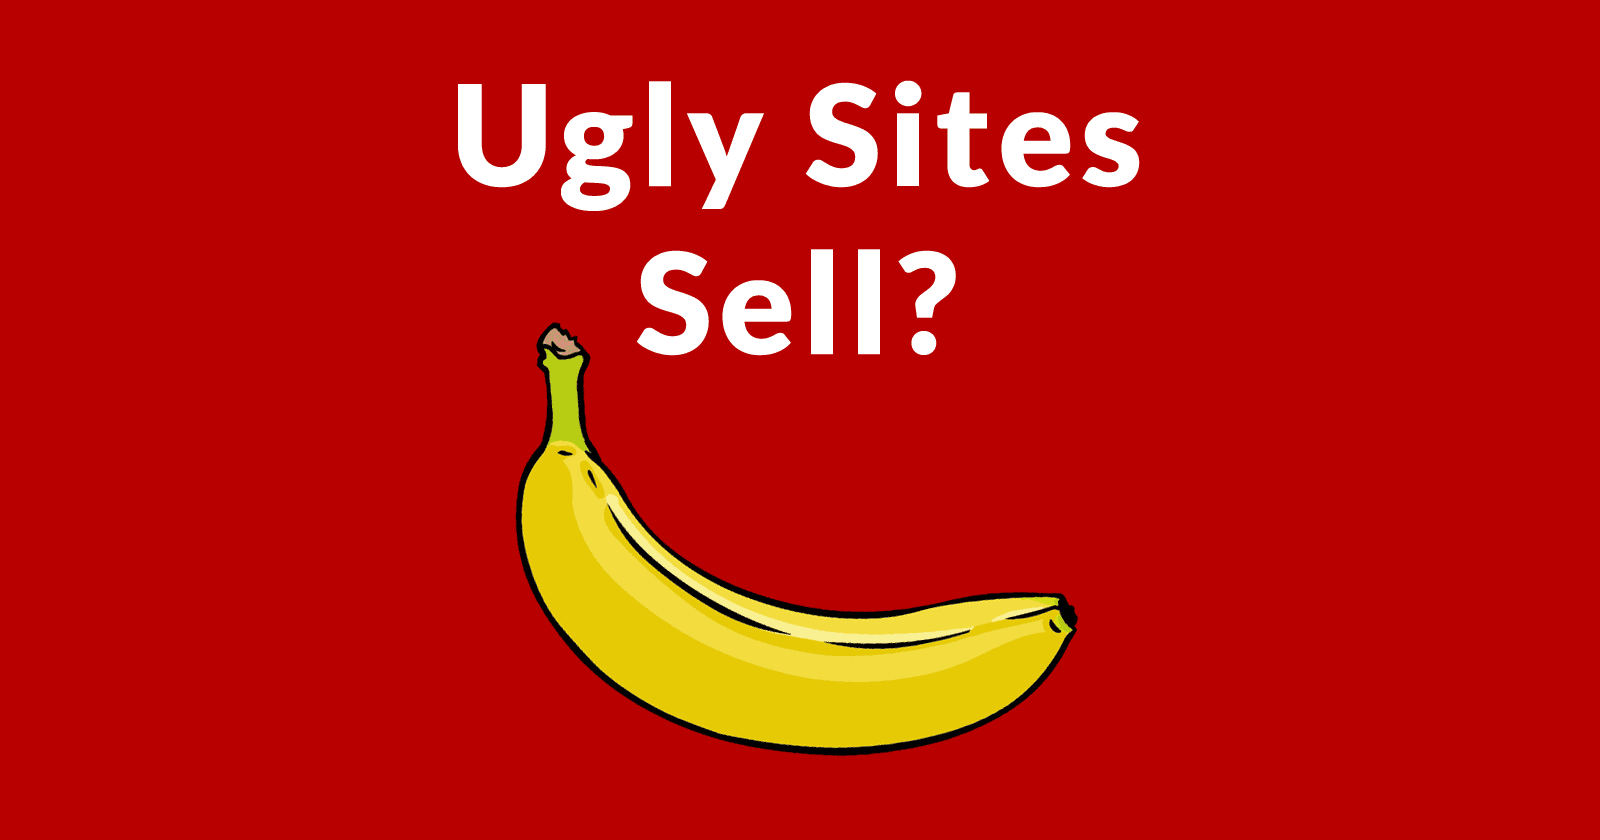 Image of a banana with the words, Ugly Sites Sell?